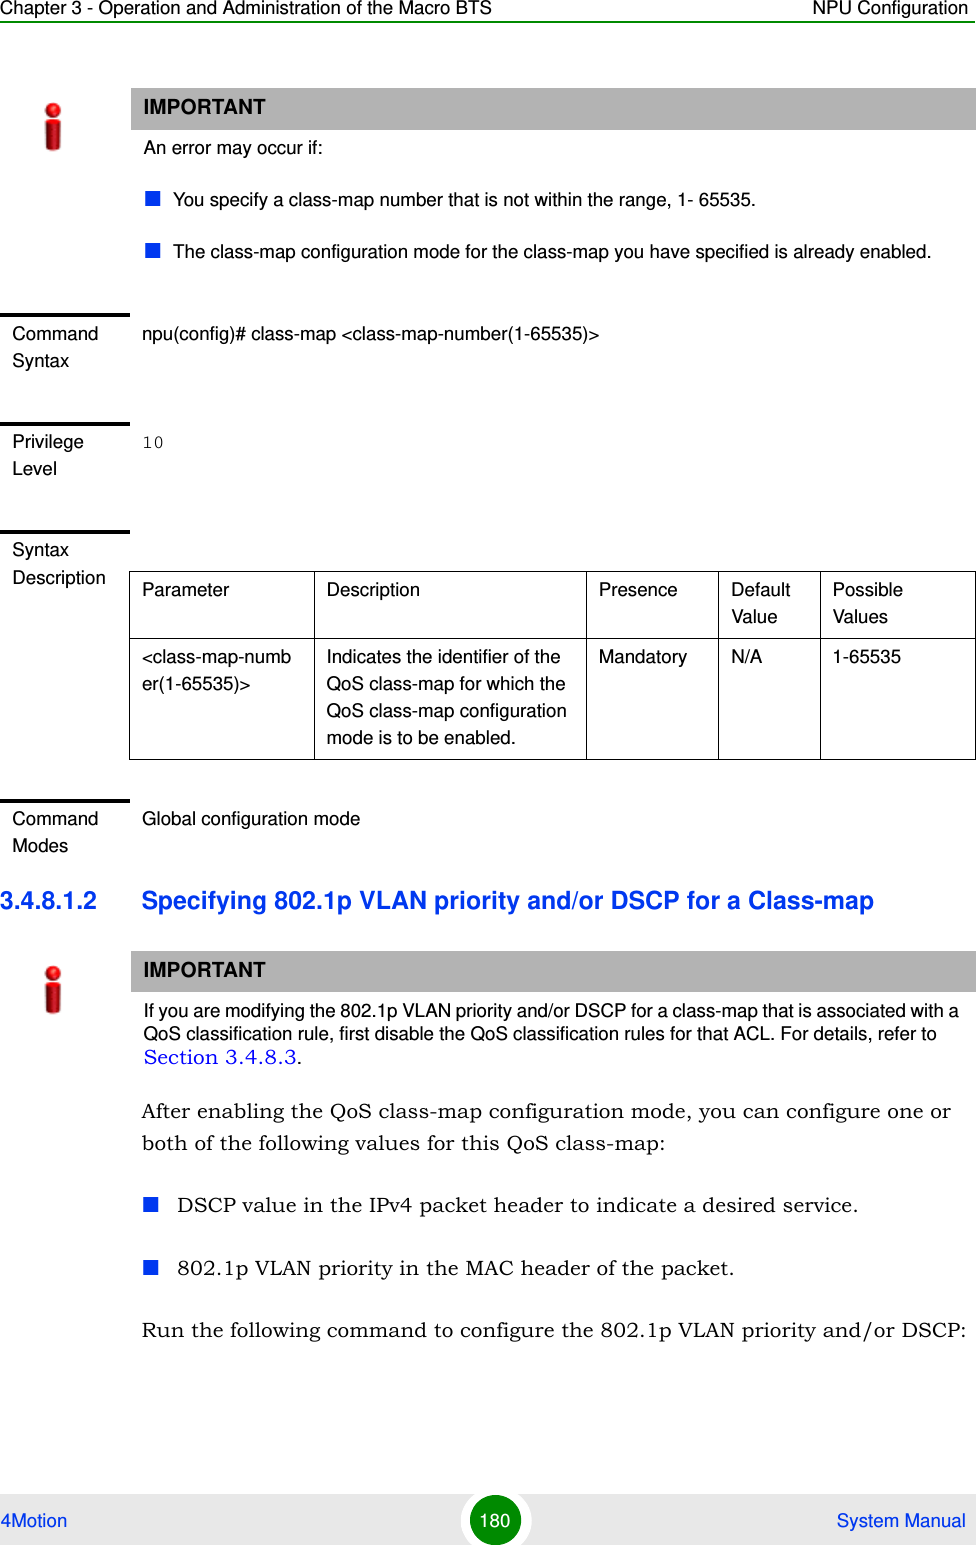 Chapter 3 - Operation and Administration of the Macro BTS NPU Configuration4Motion 180  System Manual3.4.8.1.2 Specifying 802.1p VLAN priority and/or DSCP for a Class-mapAfter enabling the QoS class-map configuration mode, you can configure one or both of the following values for this QoS class-map:DSCP value in the IPv4 packet header to indicate a desired service.802.1p VLAN priority in the MAC header of the packet.Run the following command to configure the 802.1p VLAN priority and/or DSCP: IMPORTANTAn error may occur if:You specify a class-map number that is not within the range, 1- 65535.The class-map configuration mode for the class-map you have specified is already enabled.Command Syntaxnpu(config)# class-map &lt;class-map-number(1-65535)&gt;Privilege Level10Syntax Description Parameter Description Presence Default ValuePossible Values&lt;class-map-number(1-65535)&gt;Indicates the identifier of the QoS class-map for which the QoS class-map configuration mode is to be enabled.Mandatory N/A 1-65535Command ModesGlobal configuration modeIMPORTANTIf you are modifying the 802.1p VLAN priority and/or DSCP for a class-map that is associated with a QoS classification rule, first disable the QoS classification rules for that ACL. For details, refer to Section 3.4.8.3.